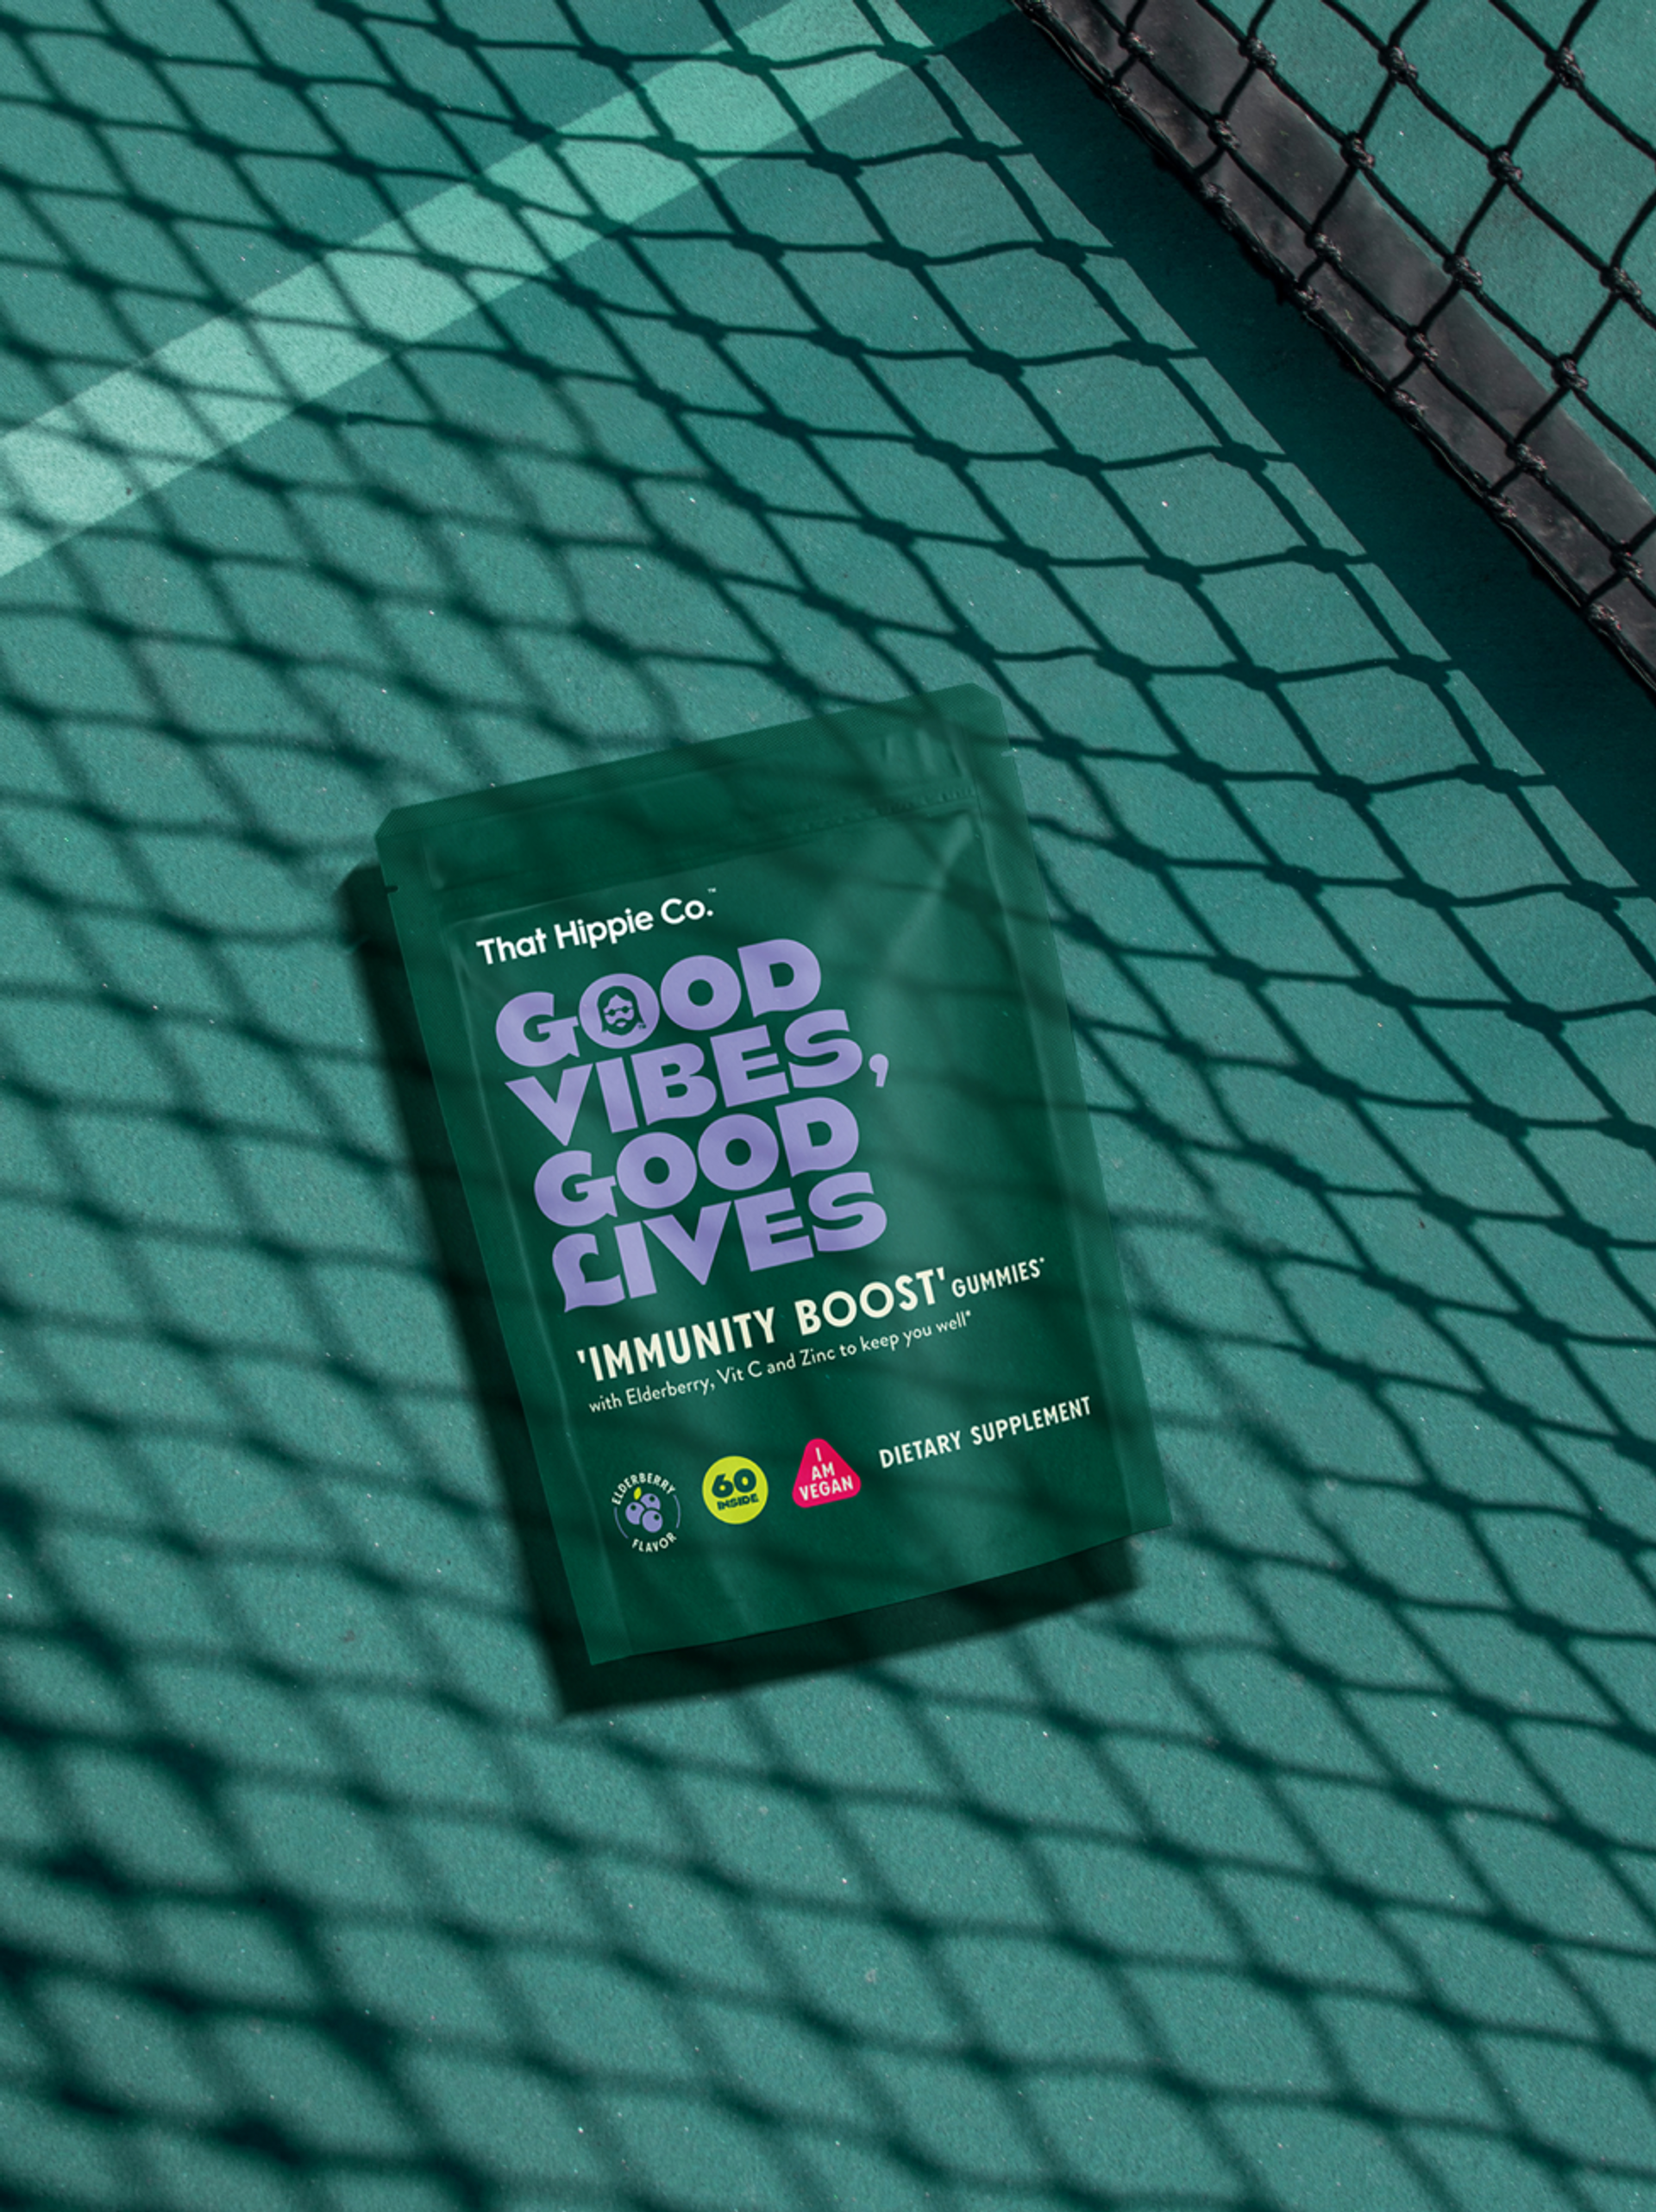 “Good vibes, good lives” immunity boost gummies by packaging design agency Our Revolution for supplement brand That Hippie Co. in the shadow of tennis court net